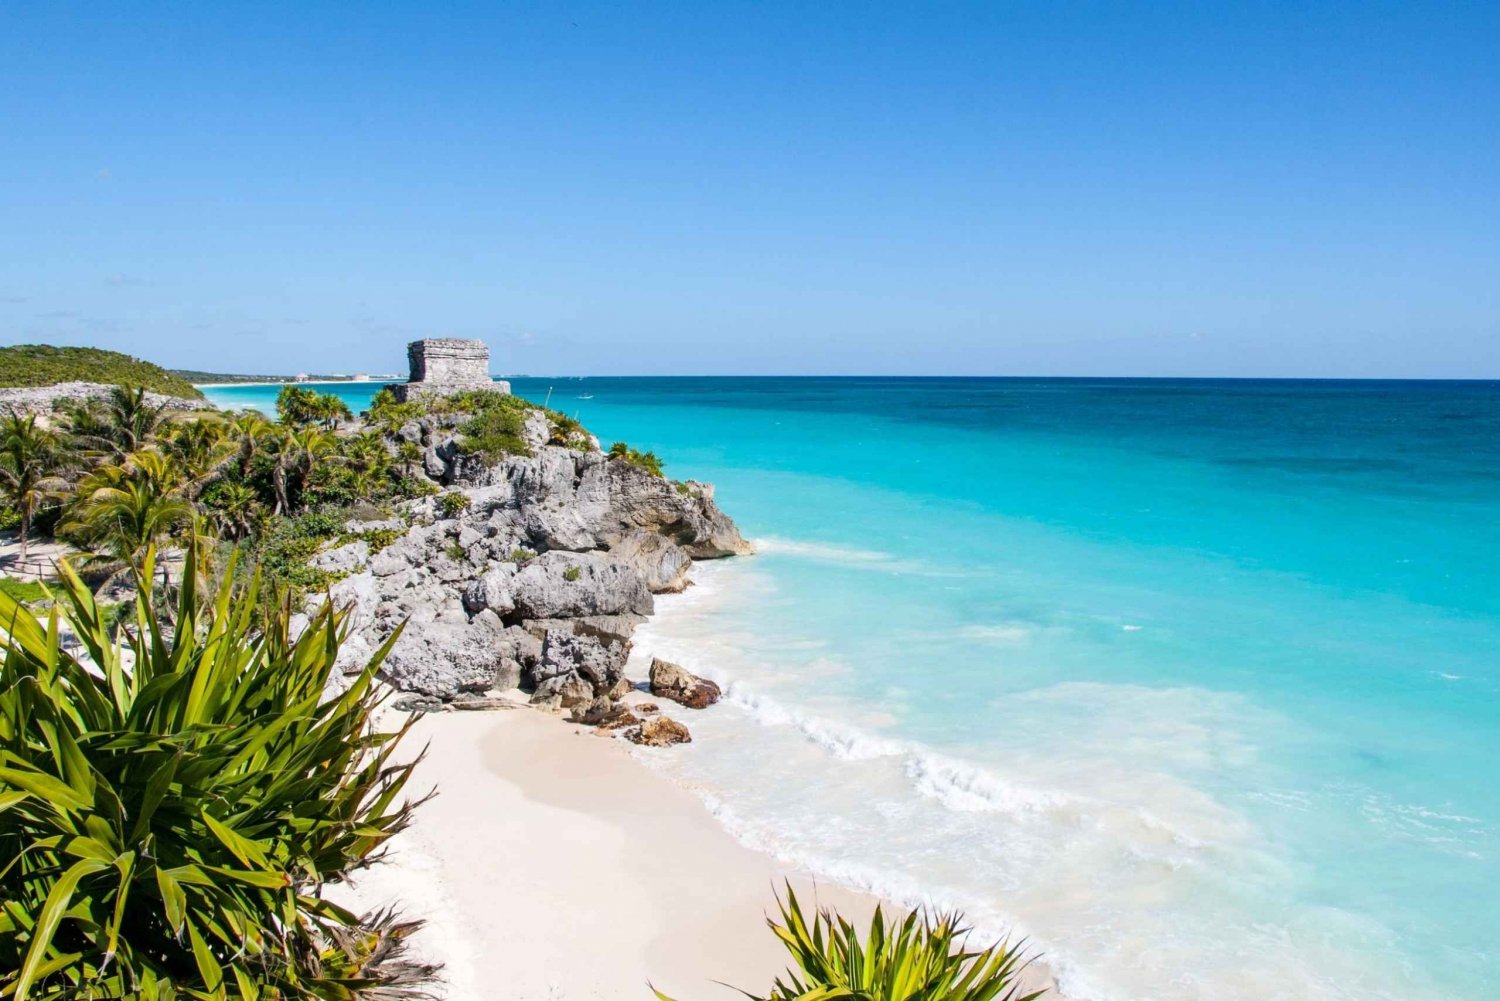 Unmissable experiences in Quintana Roo